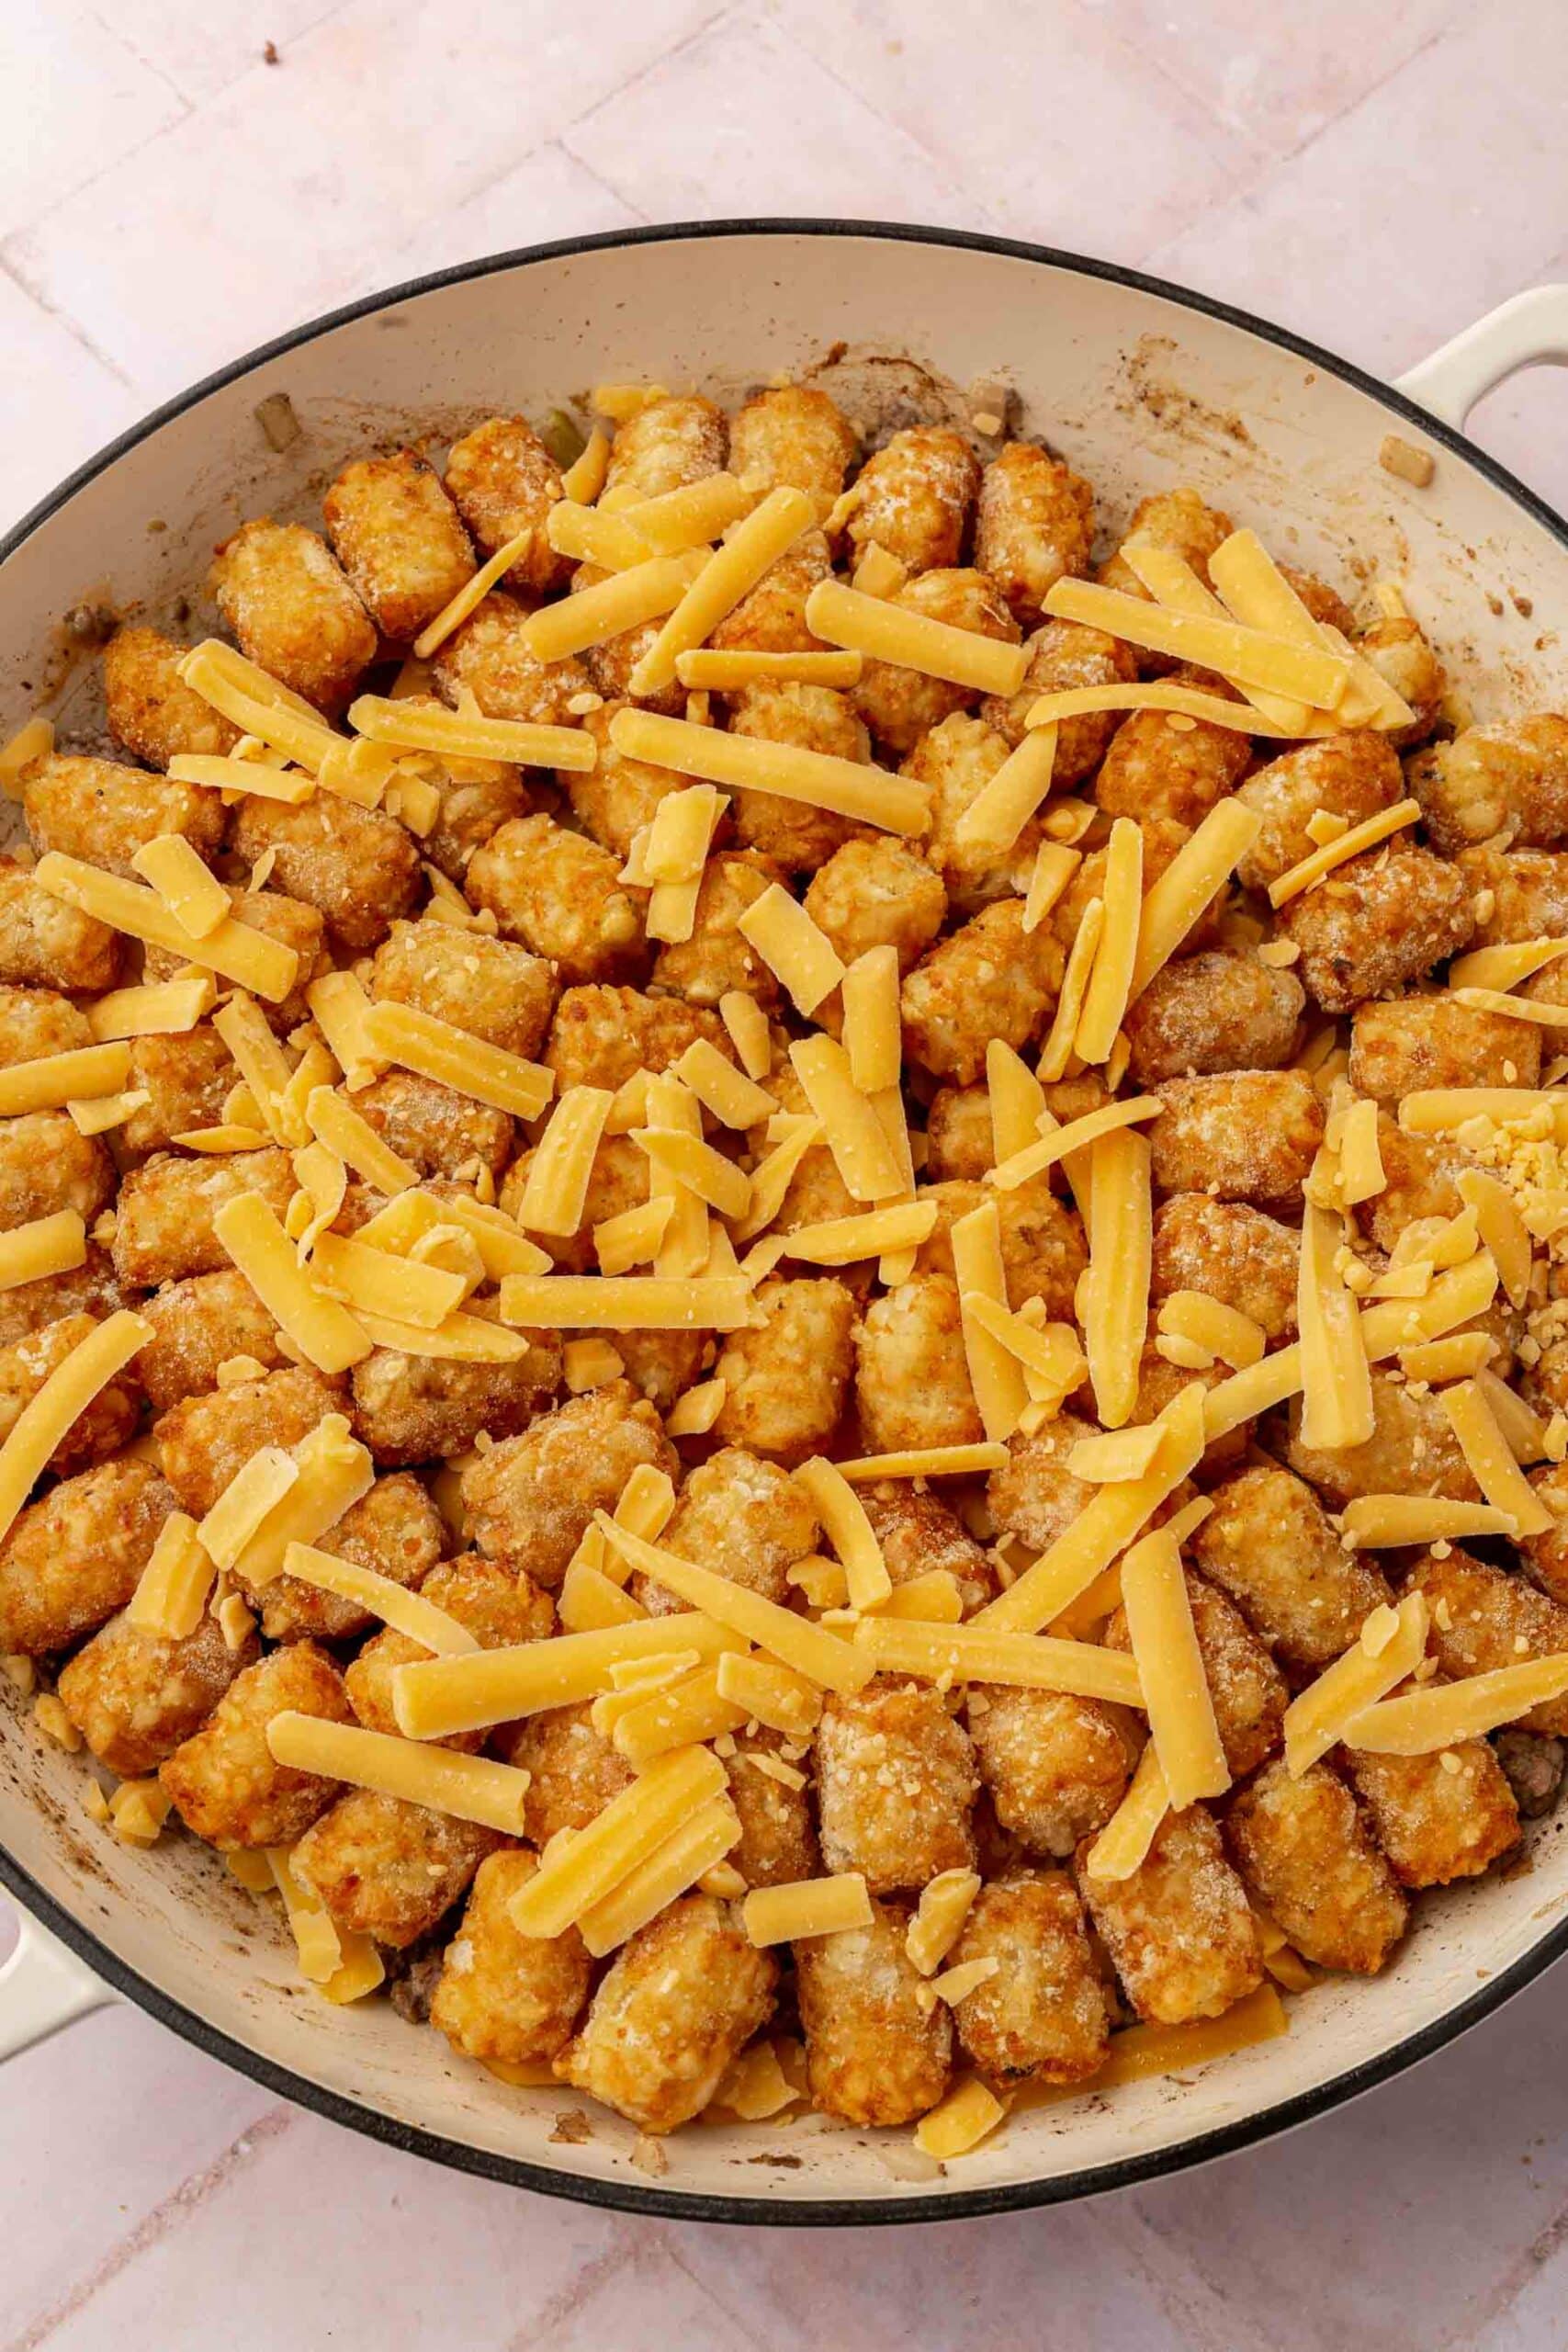 Tater tots topped with shredded cheese in a round white braising pan before placing in the oven.